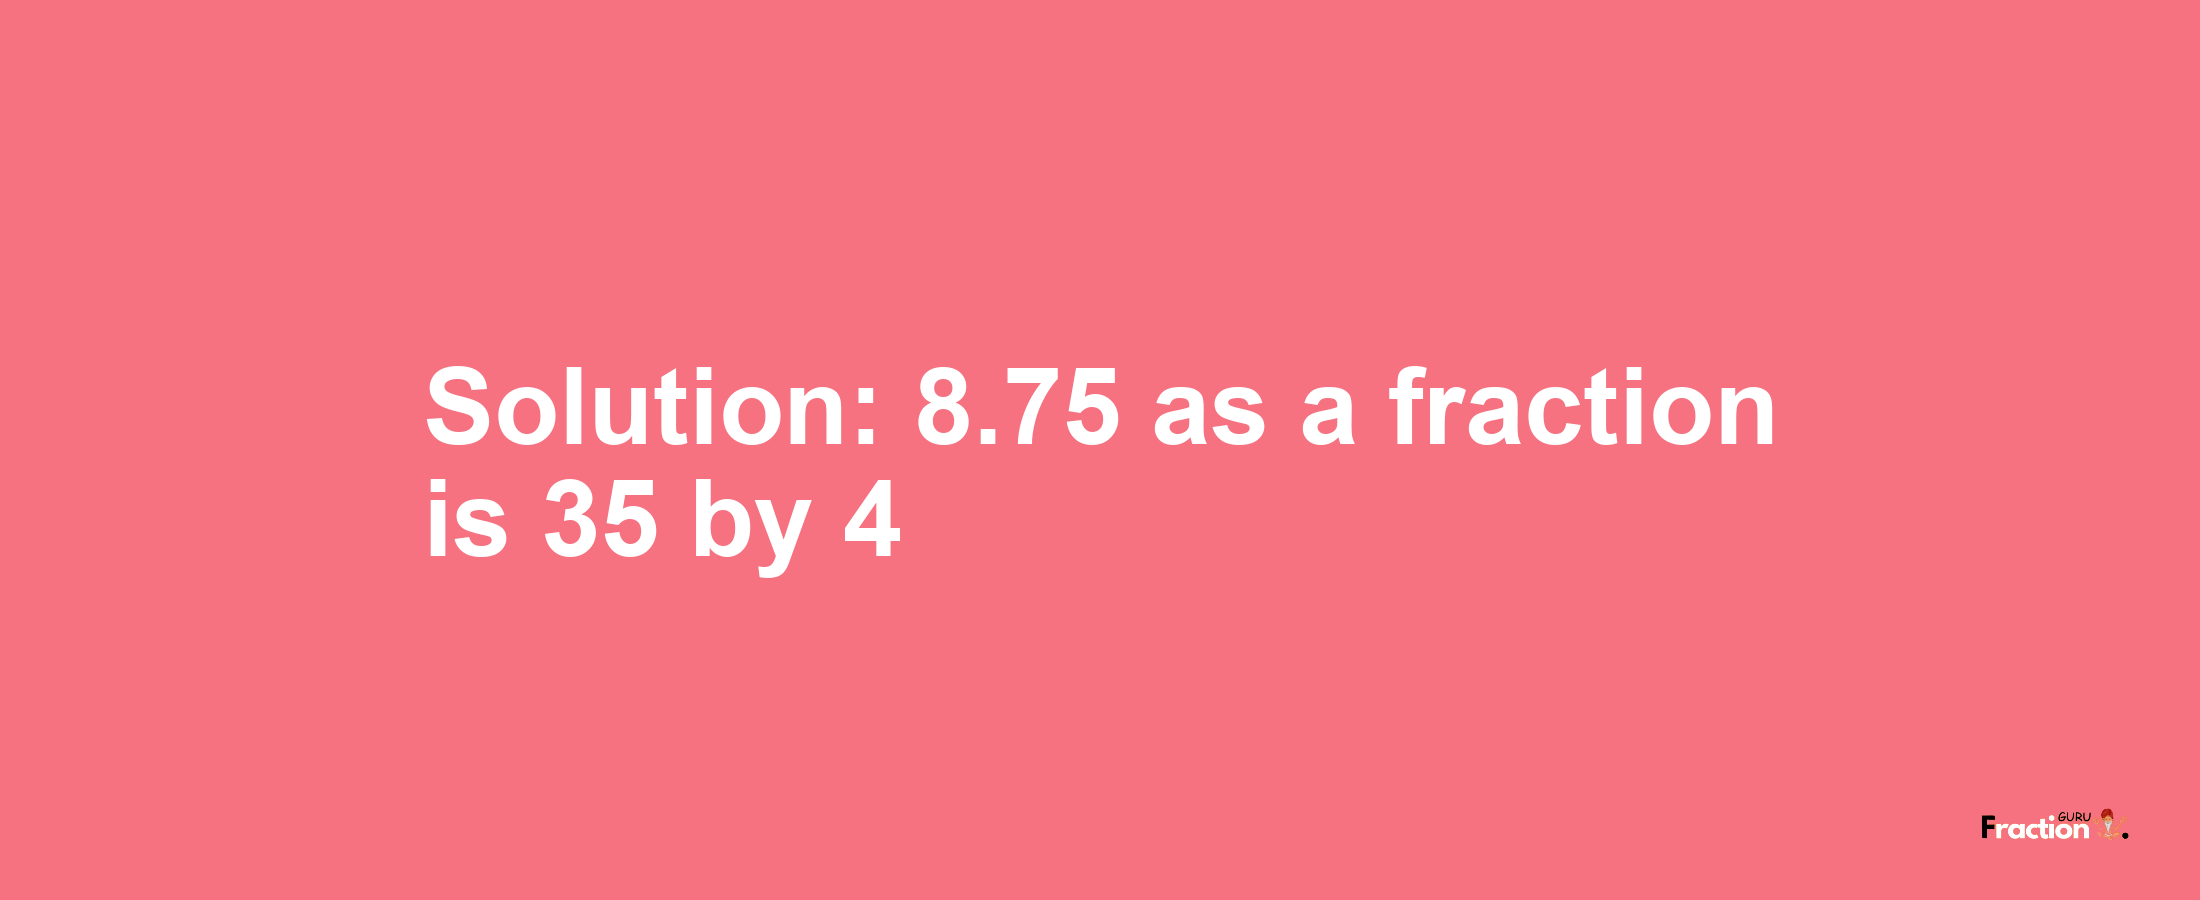 Solution:8.75 as a fraction is 35/4